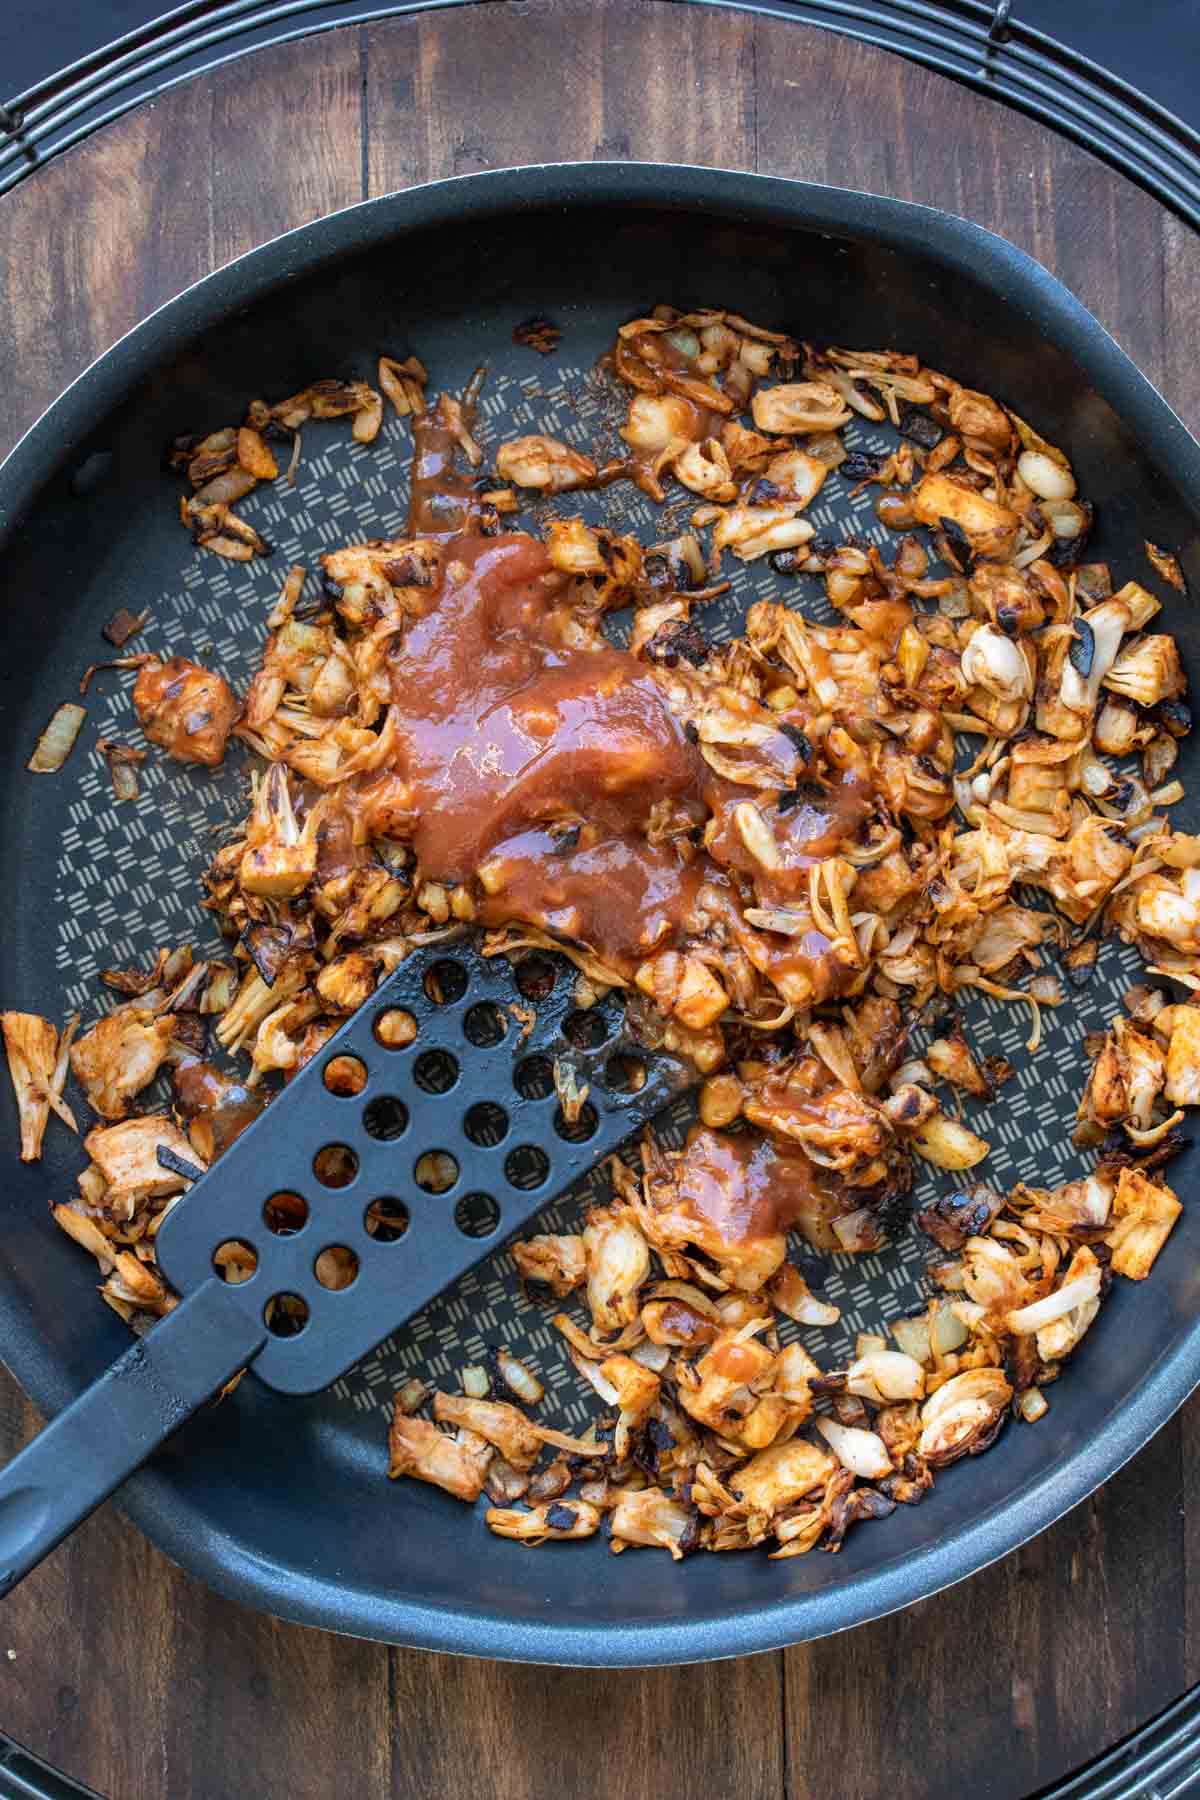 Spatula mixing BBQ sauce over pieces of browned jackfruit in a pan.